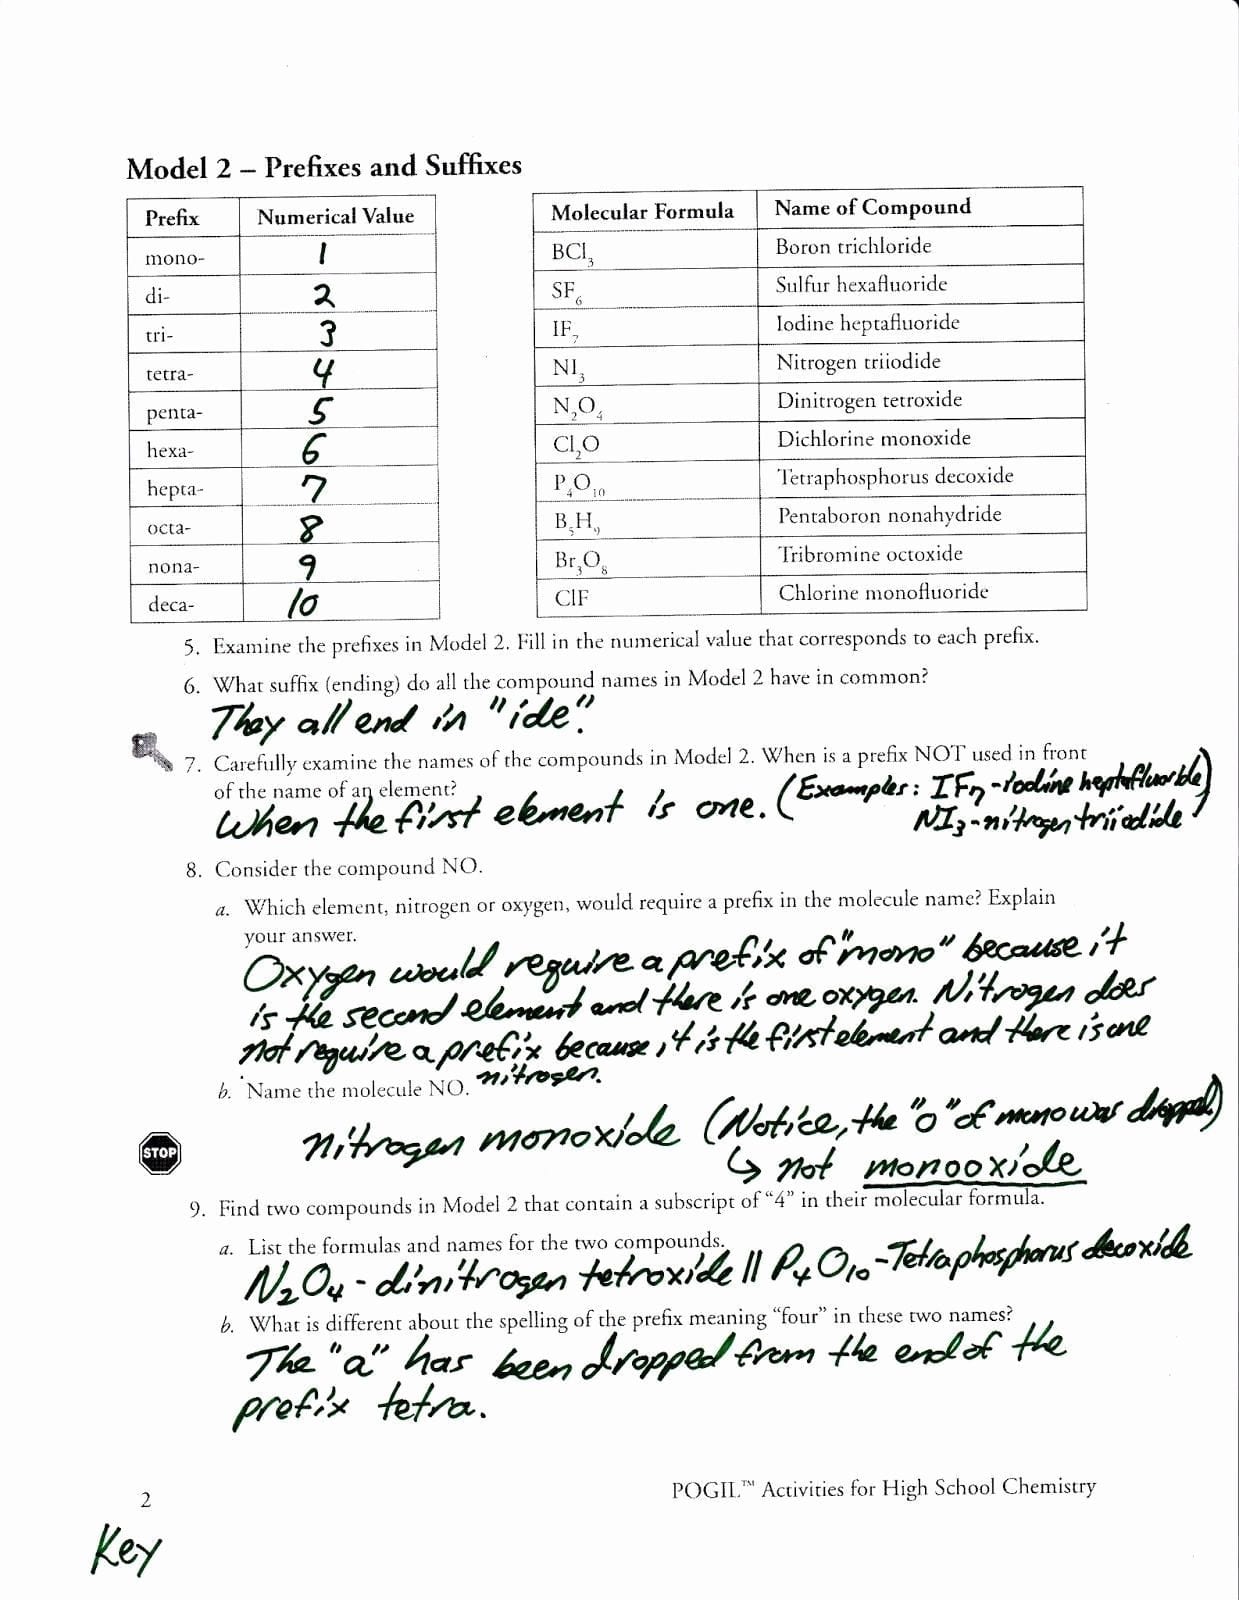 naming-covalent-compounds-worksheet-answers-nf3-naturalism